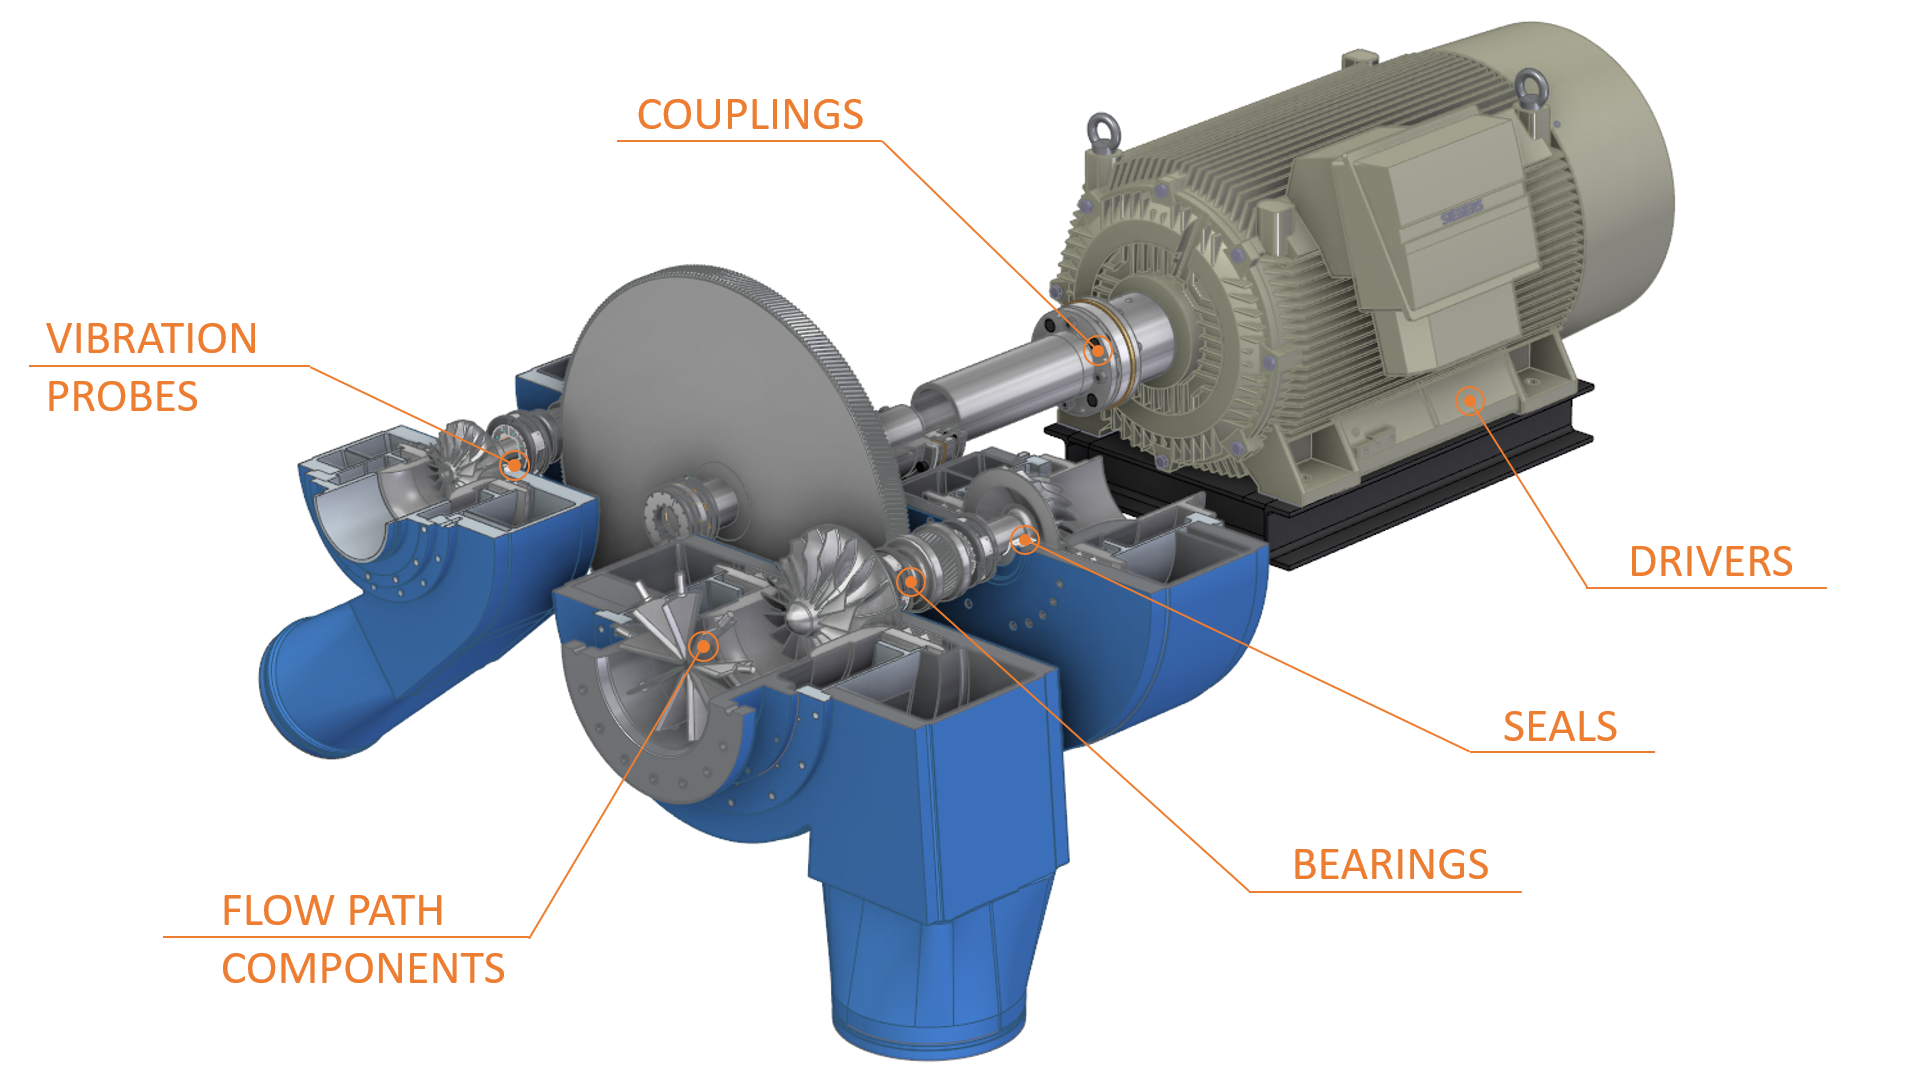 : Services - Centrifugal compressors and blowers